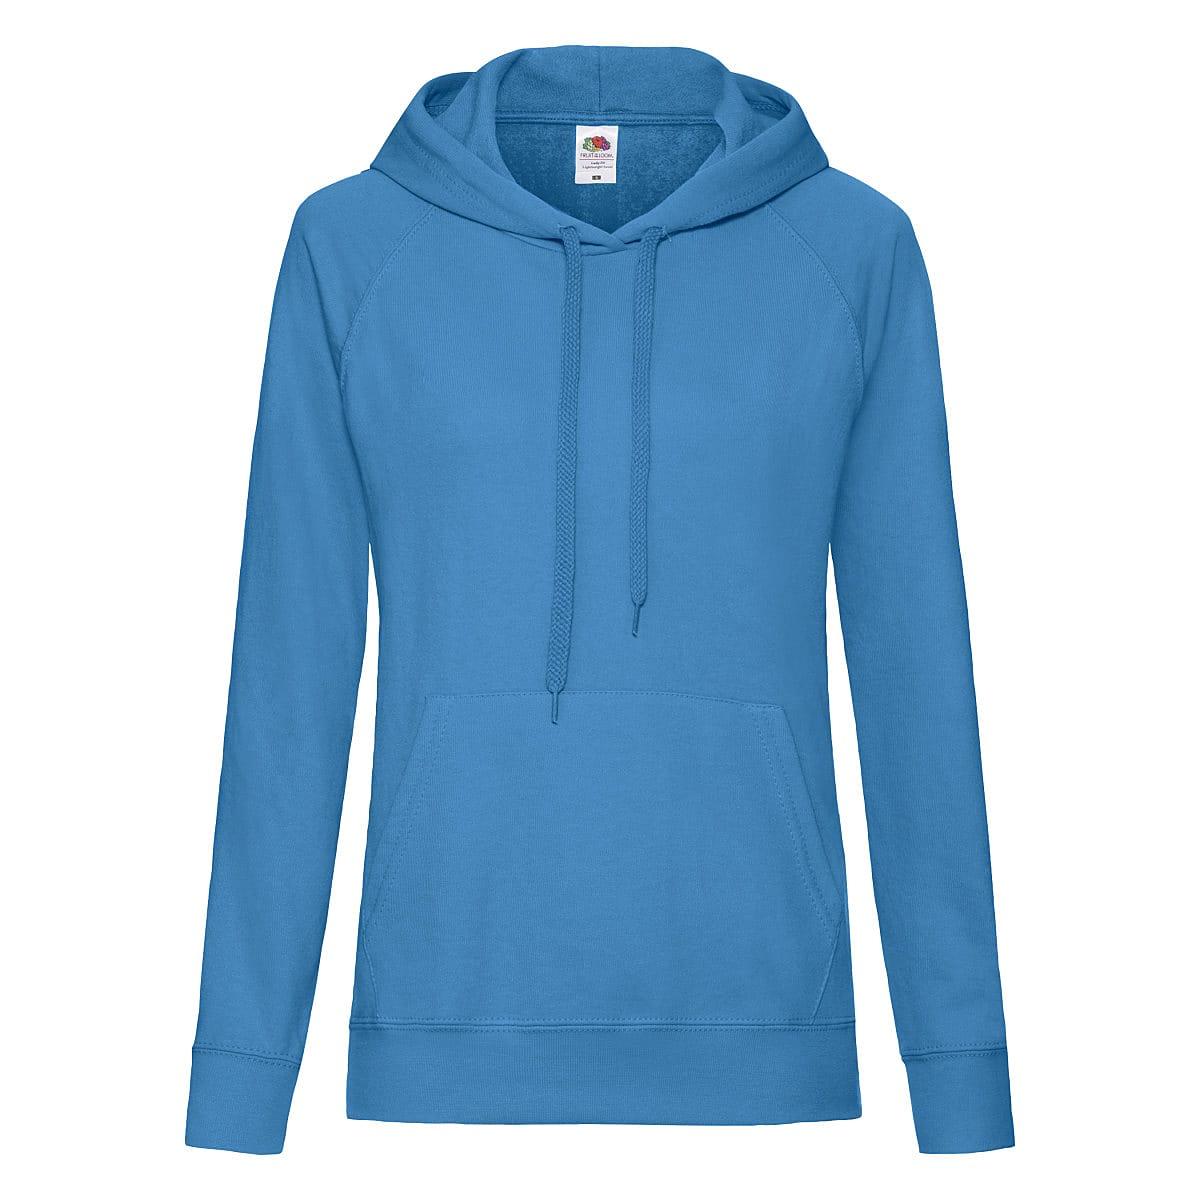 Fruit Of The Loom Lady-Fit Lightweight Hoodie in Azure Blue (Product Code: 62148)